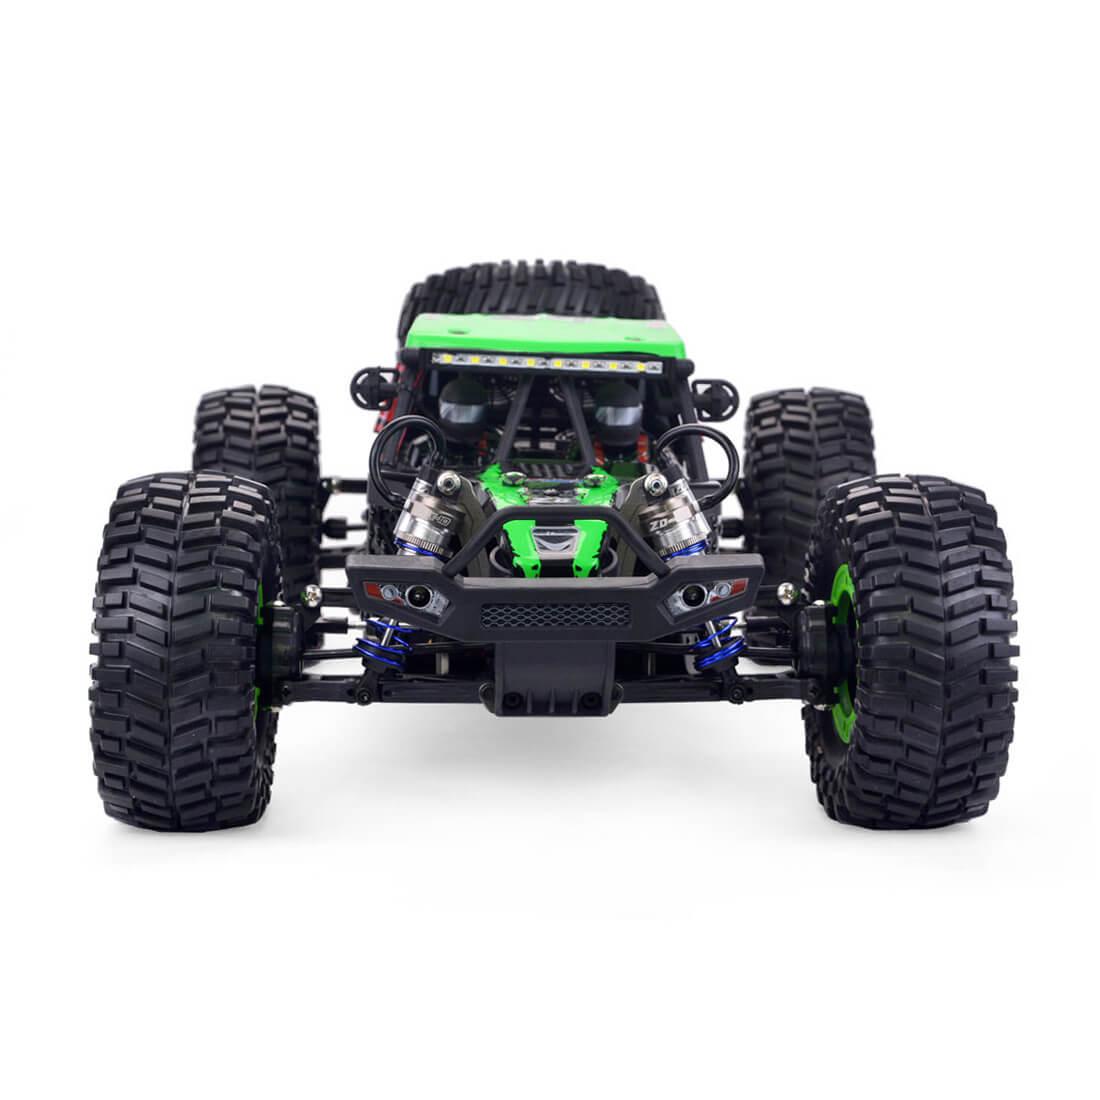 Best Brushless Rc Car: Top contender for speed, power, and durability.